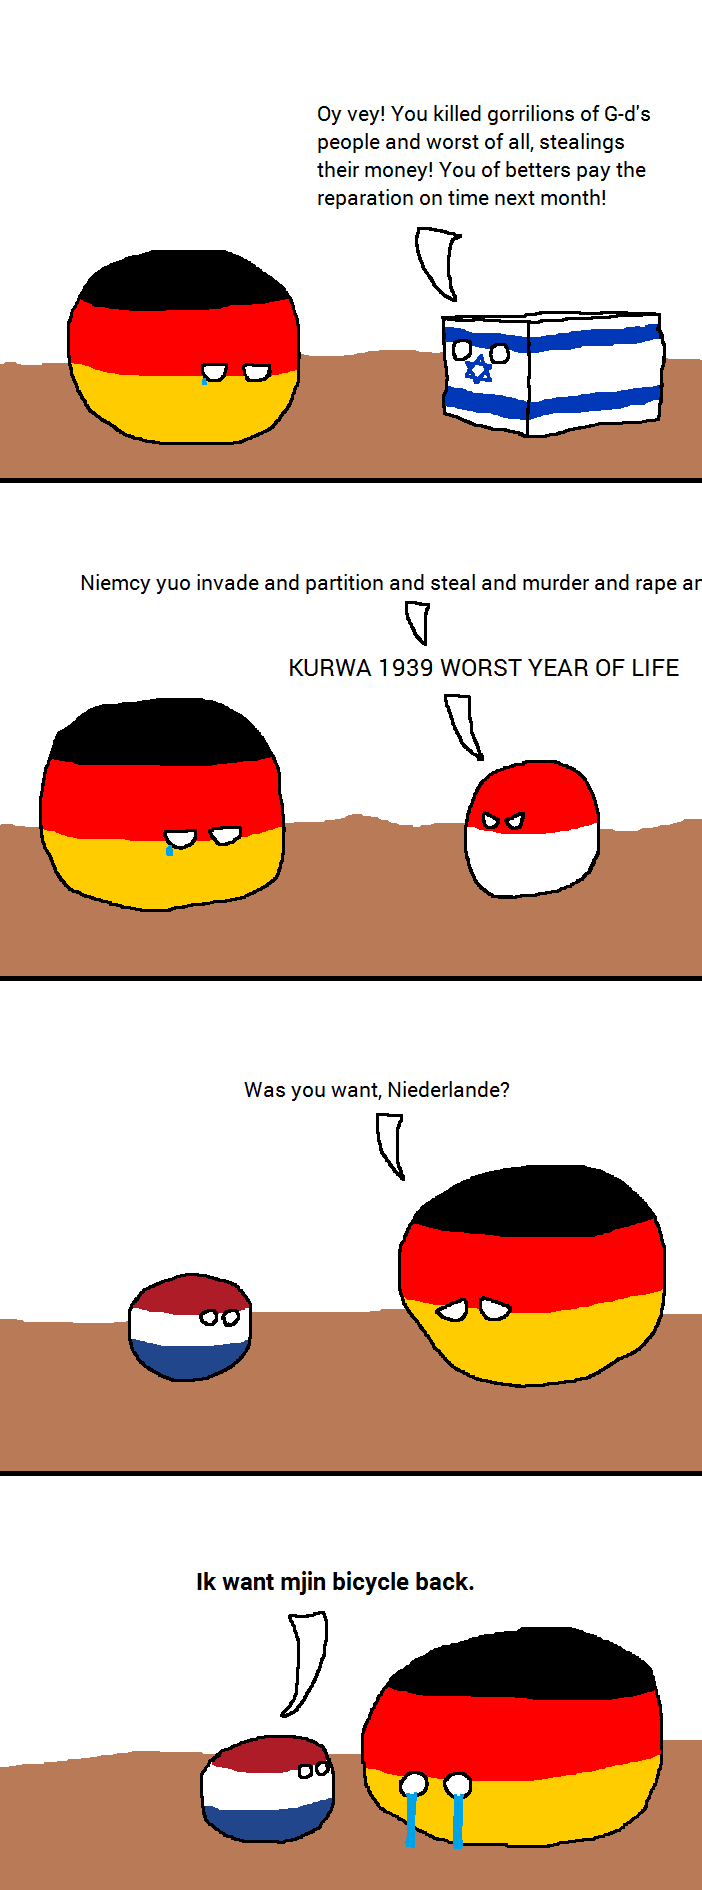 poland3.png